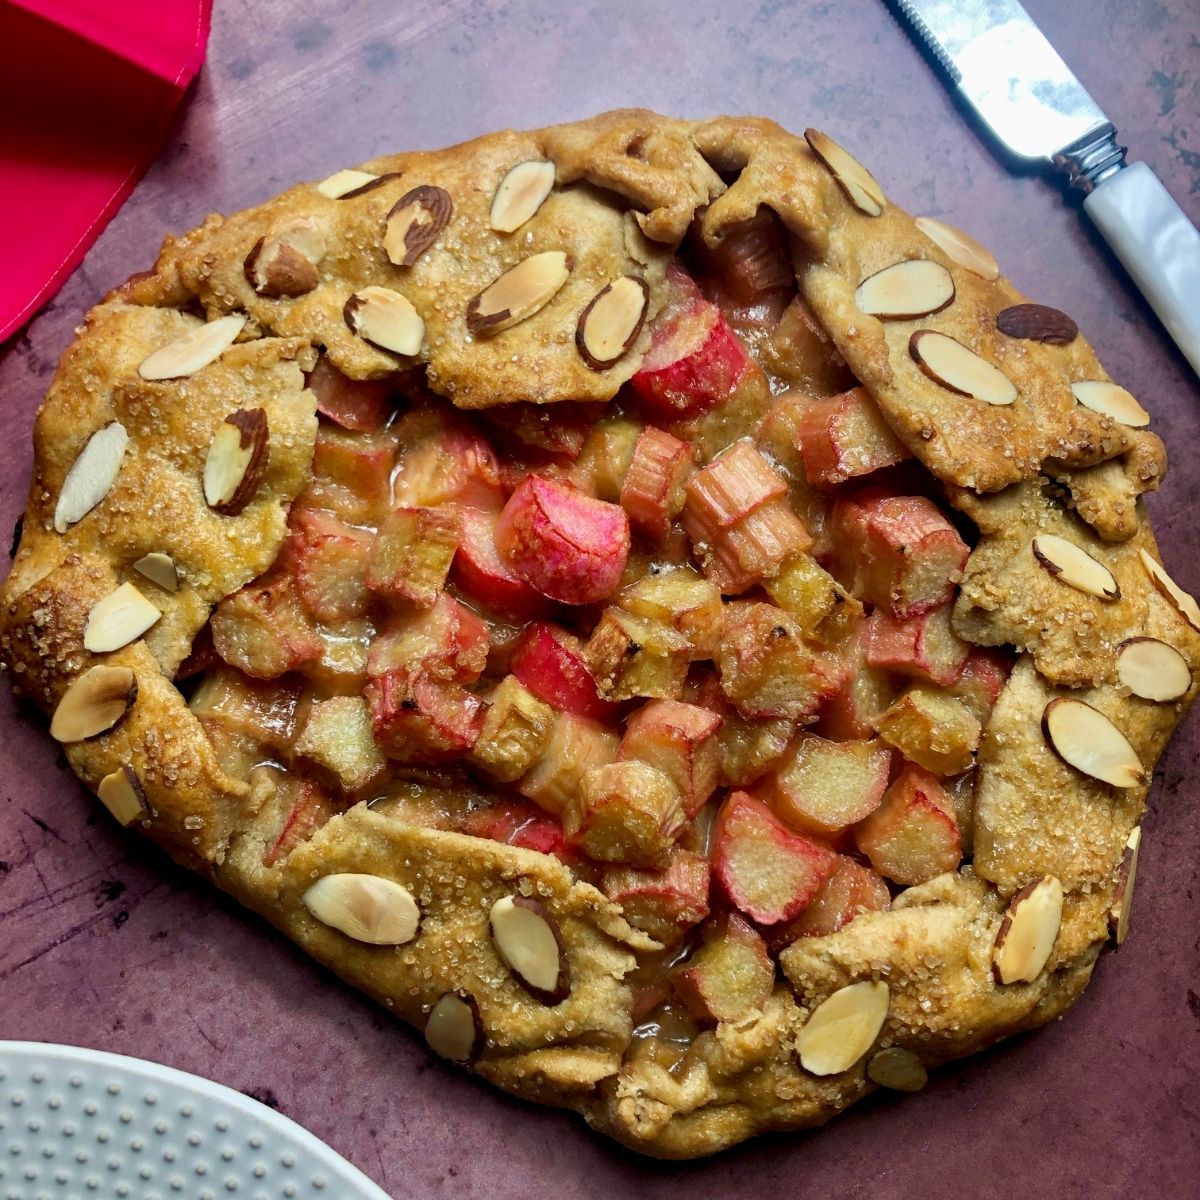 a rhubarb galette garnished with sliced almonds on crust